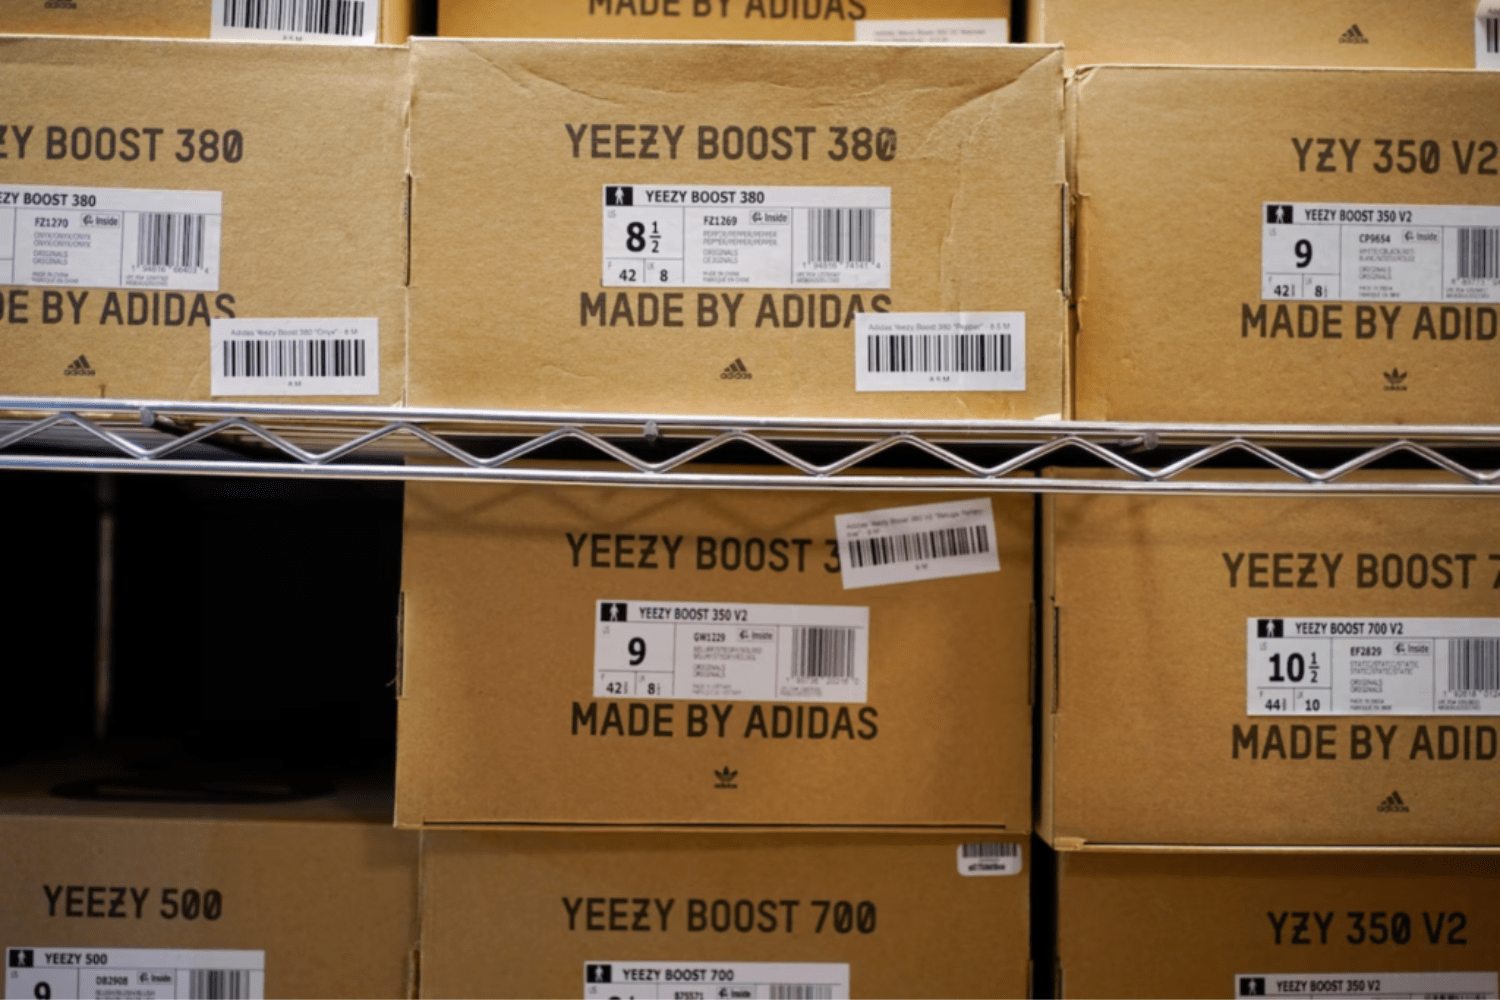 adidas announces plans to sell remaining Yeezys